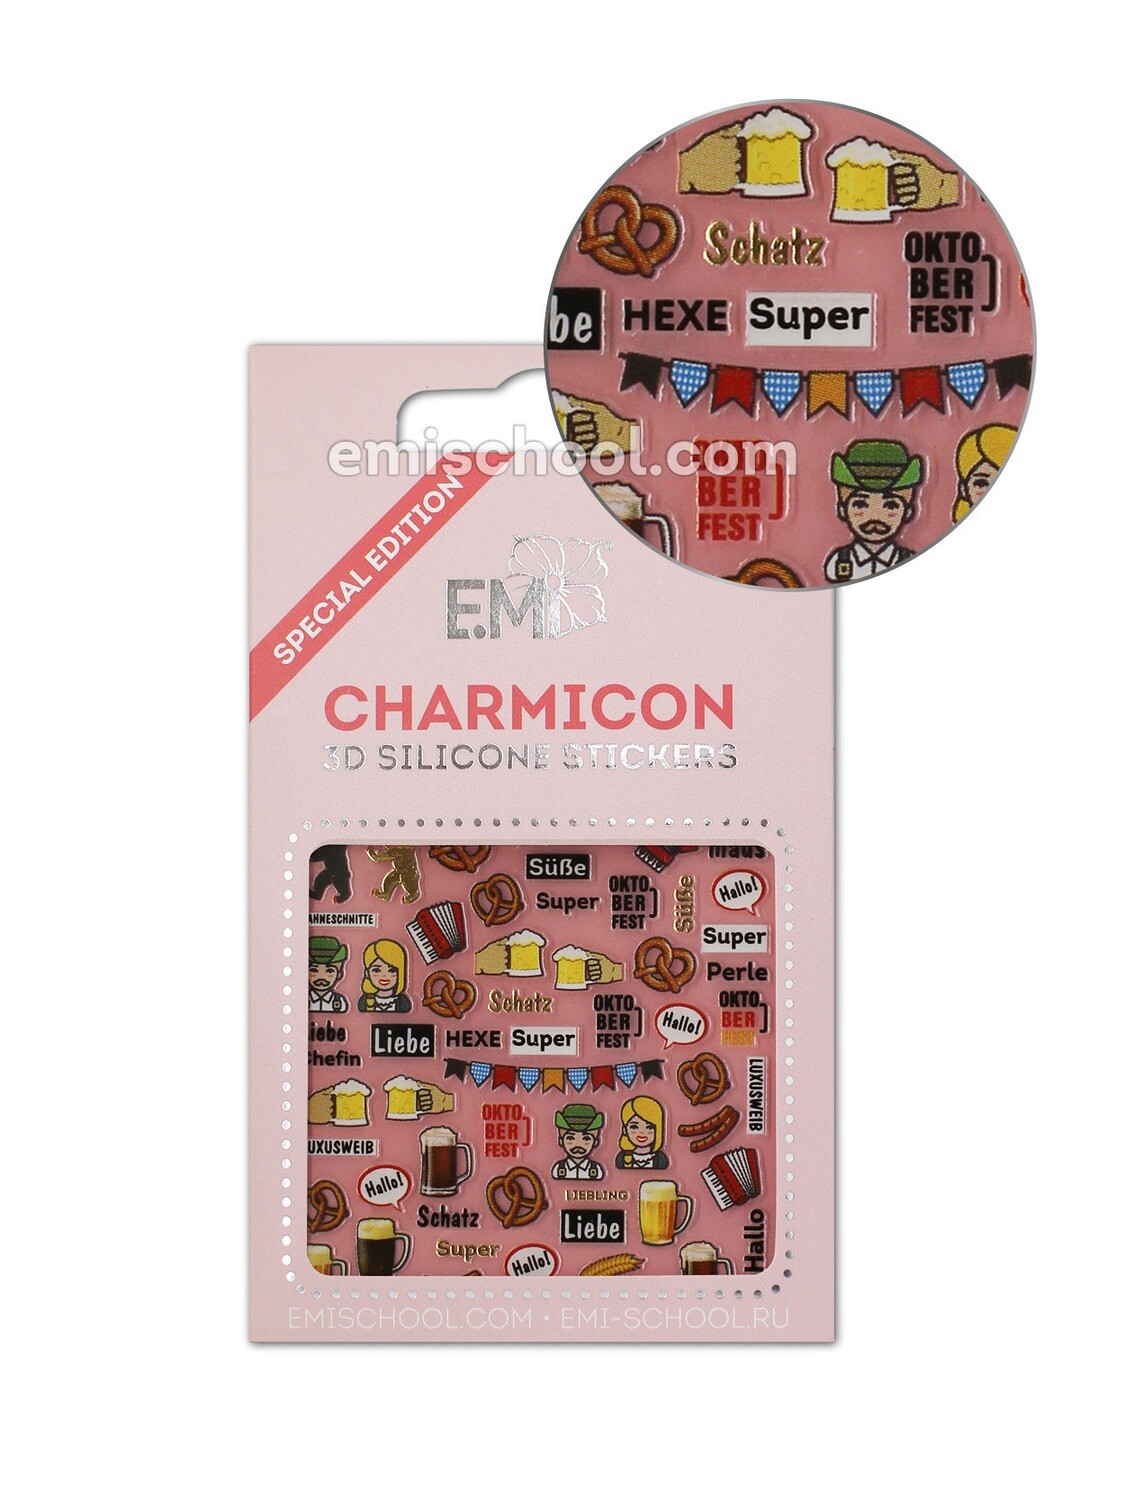 Charmicon 3D Silicone Stickers Germany 2